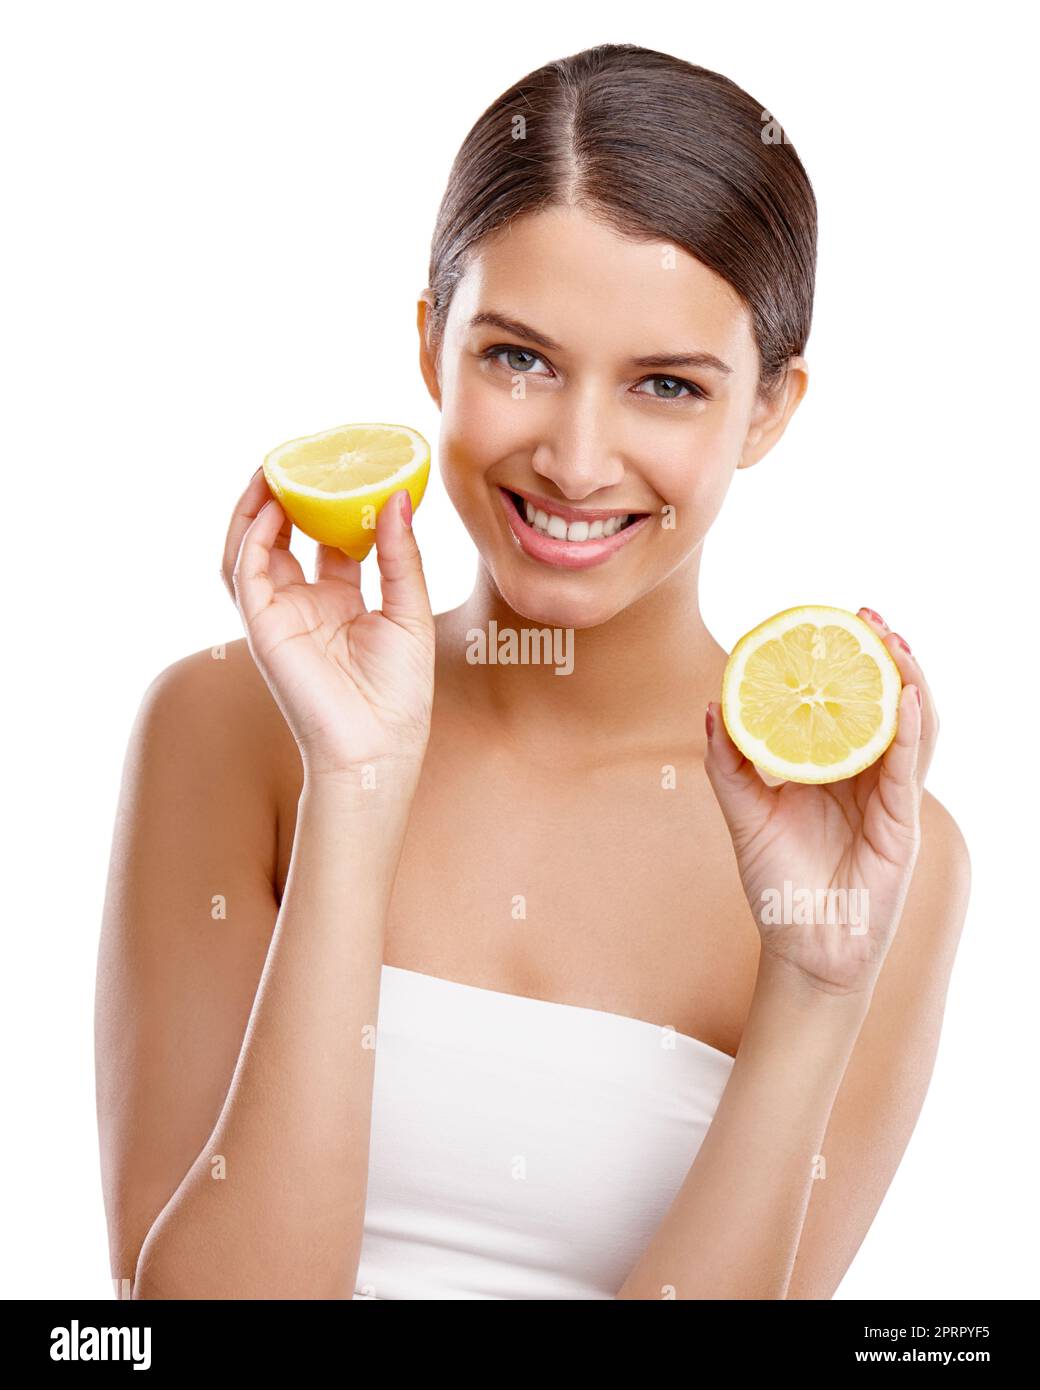 Add some freshness to your skin. Studio portrait of a young woman holding up two halves of a lemon. Stock Photo